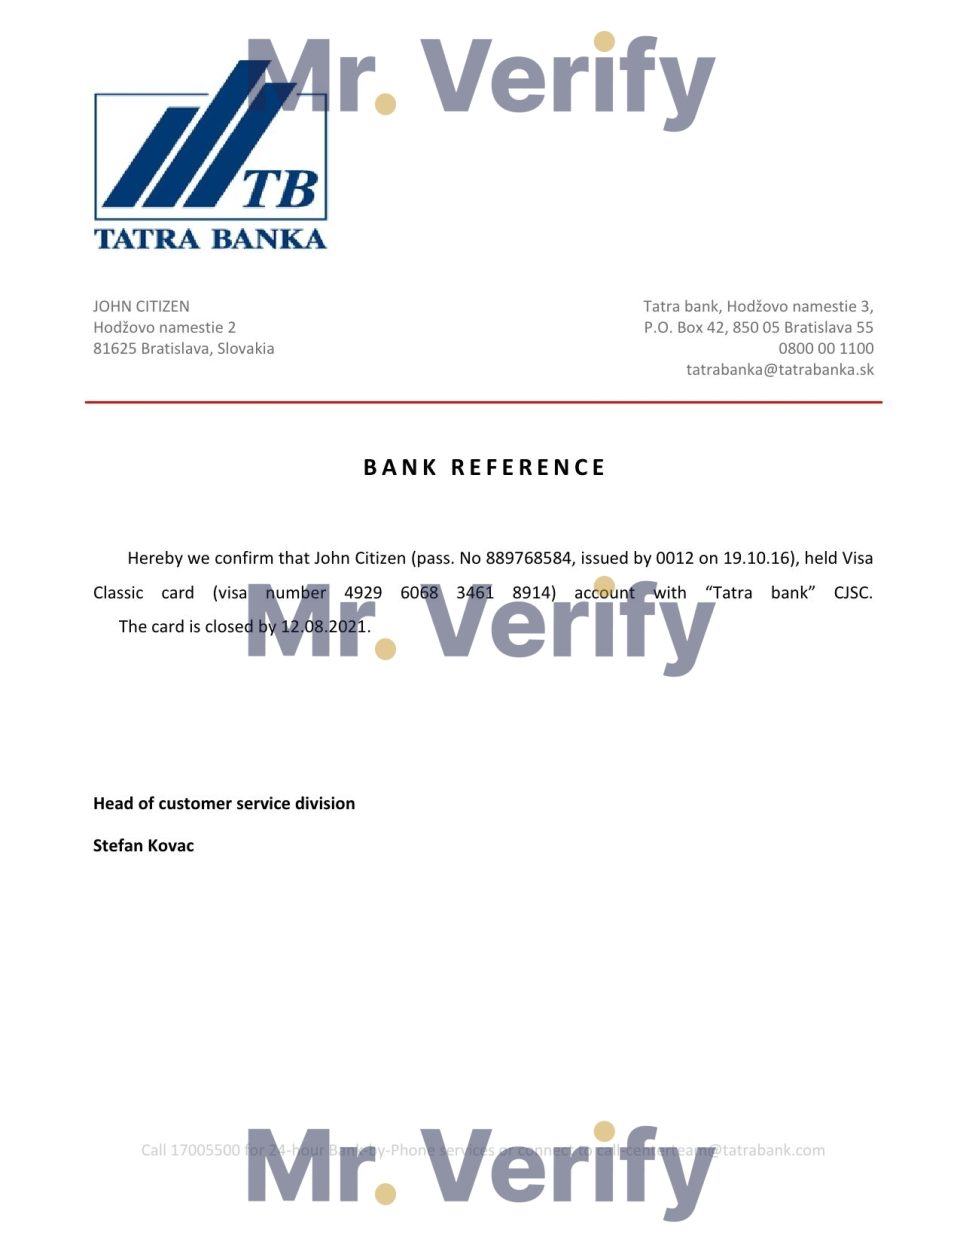 Download Slovakia Tatra Bank Reference Letter Templates | Editable Word